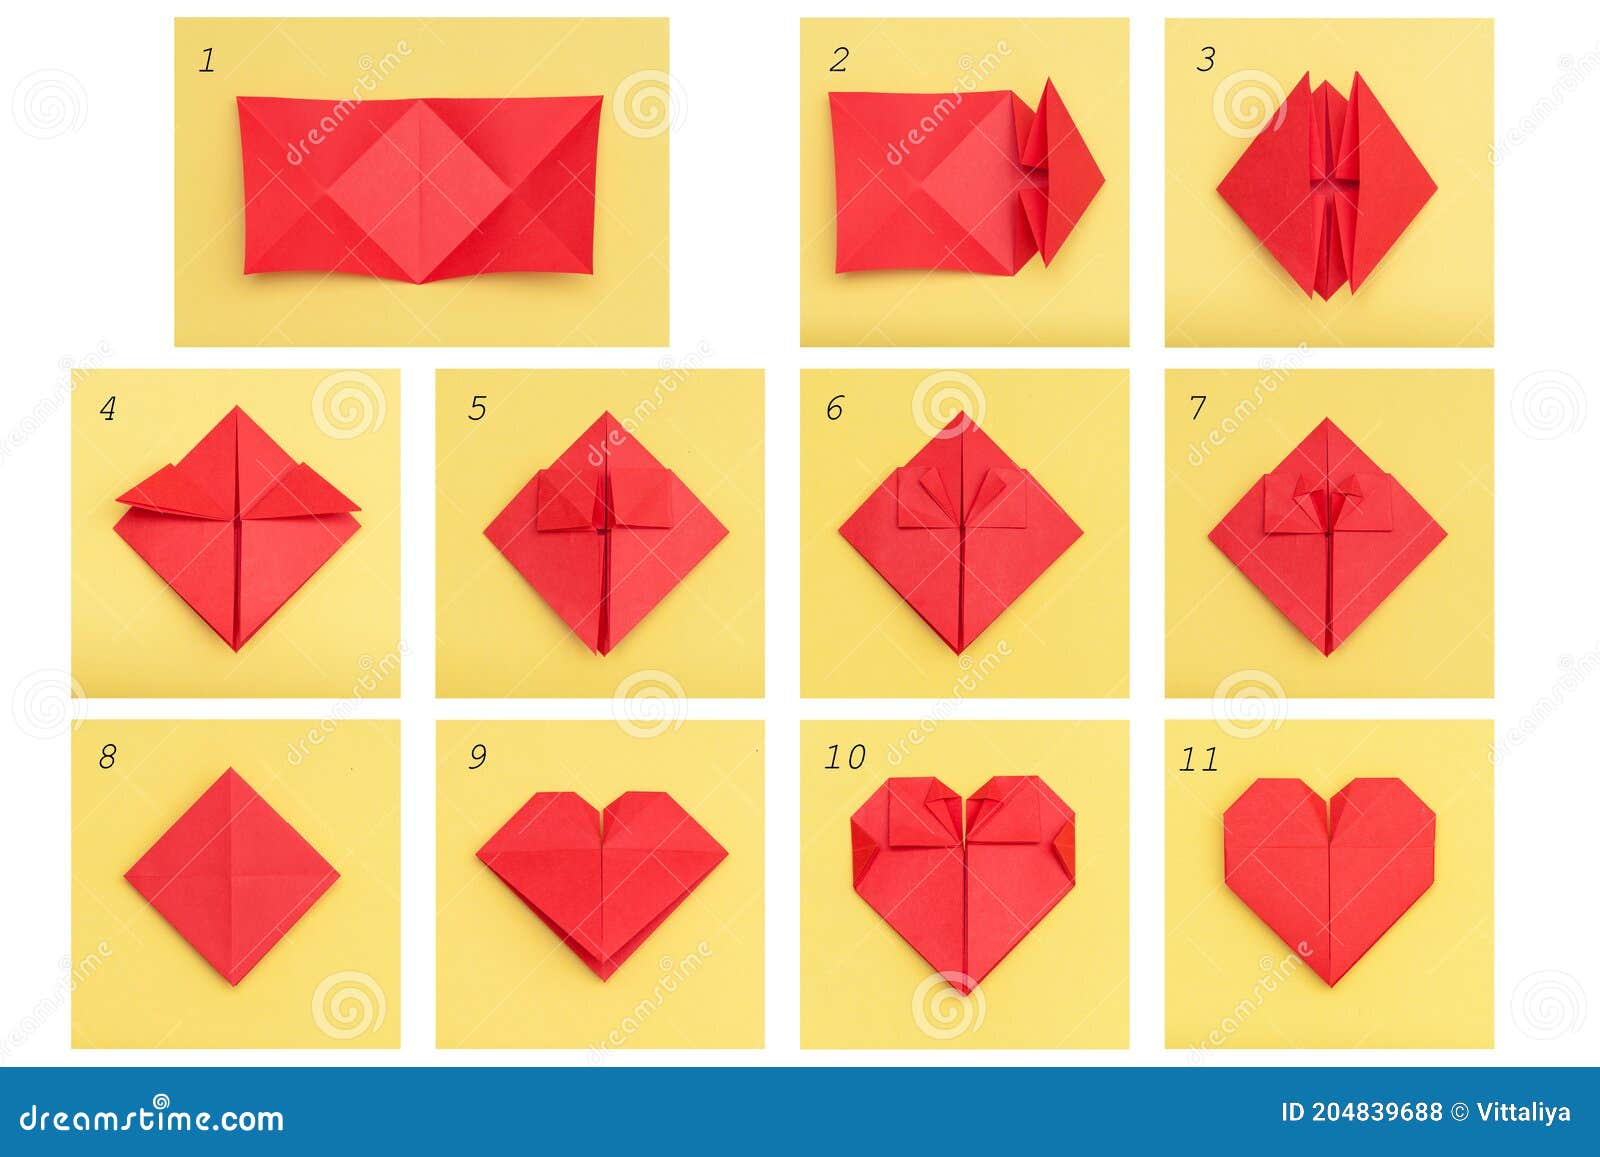 Step by Step Instruction How To Make Paper Heart. DIY Concept